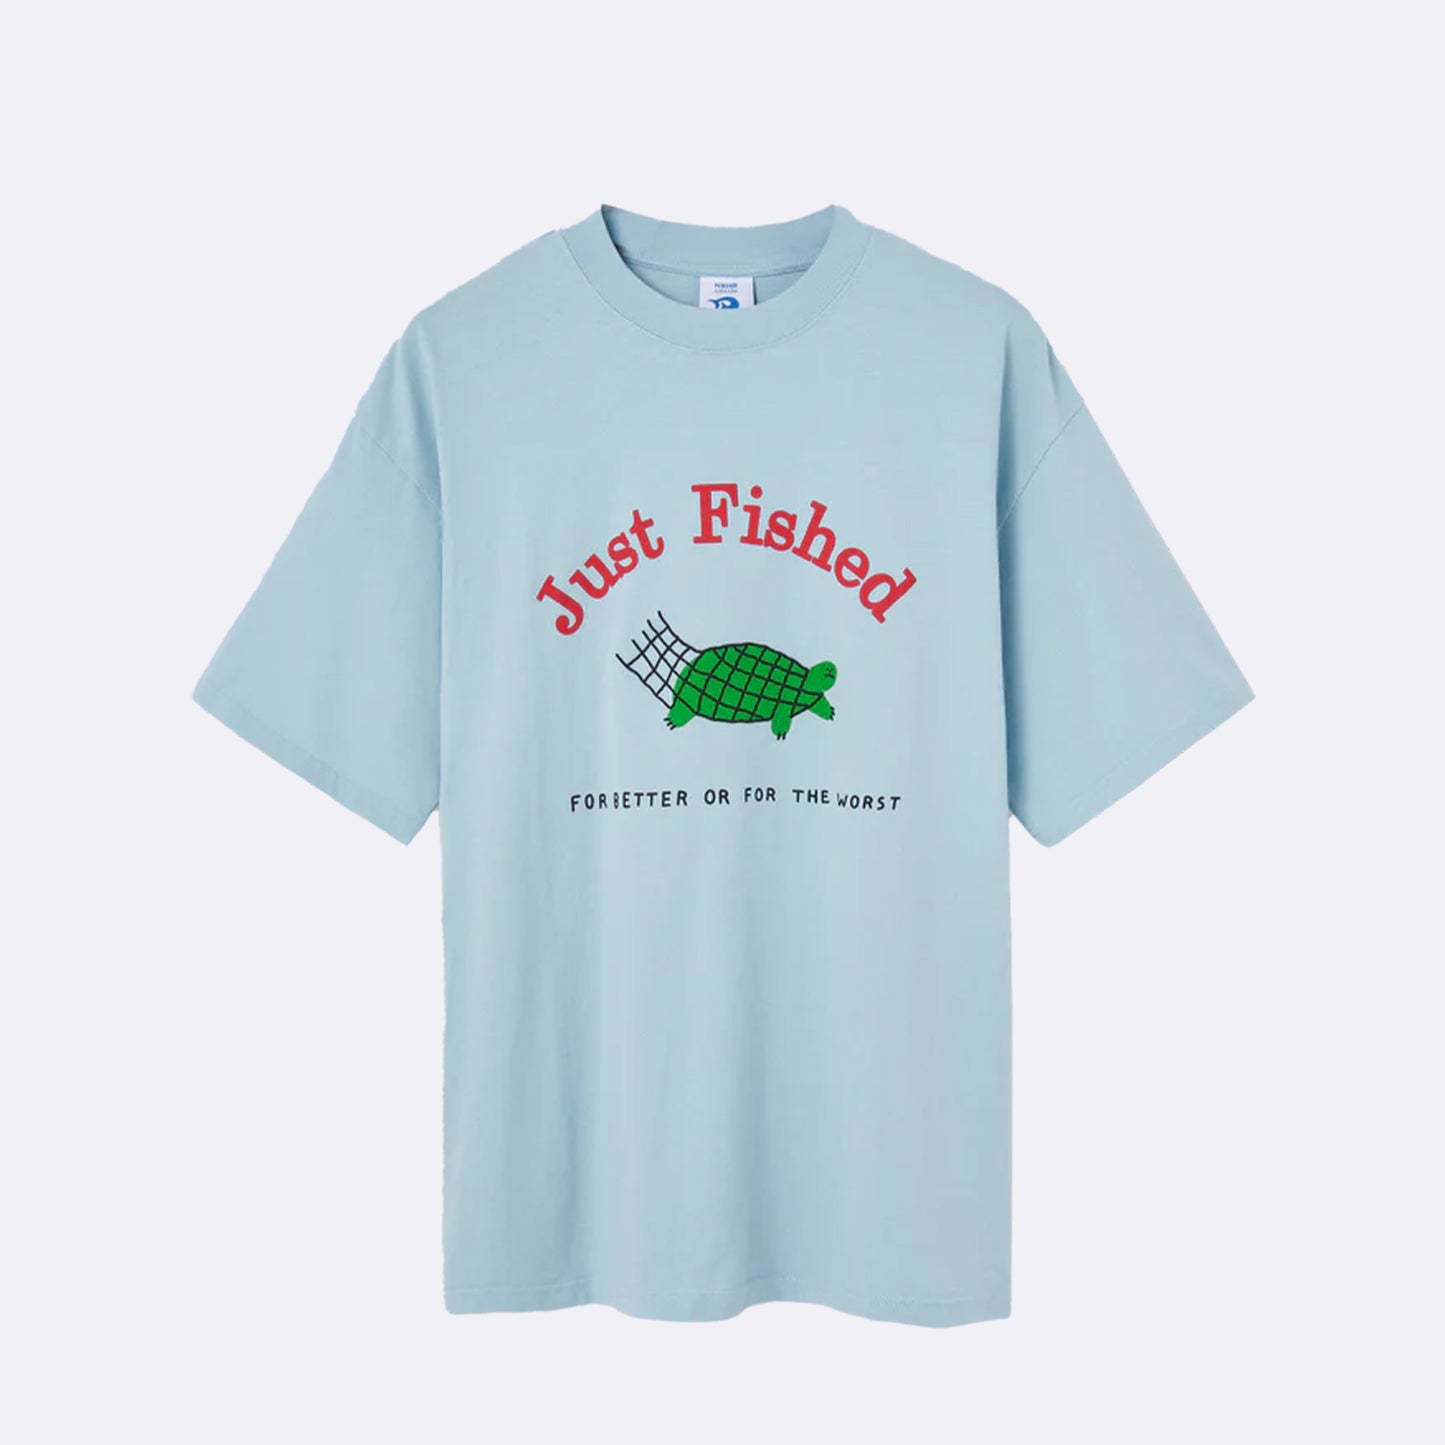 Nwhr Just Fished Tee Shirt Blue